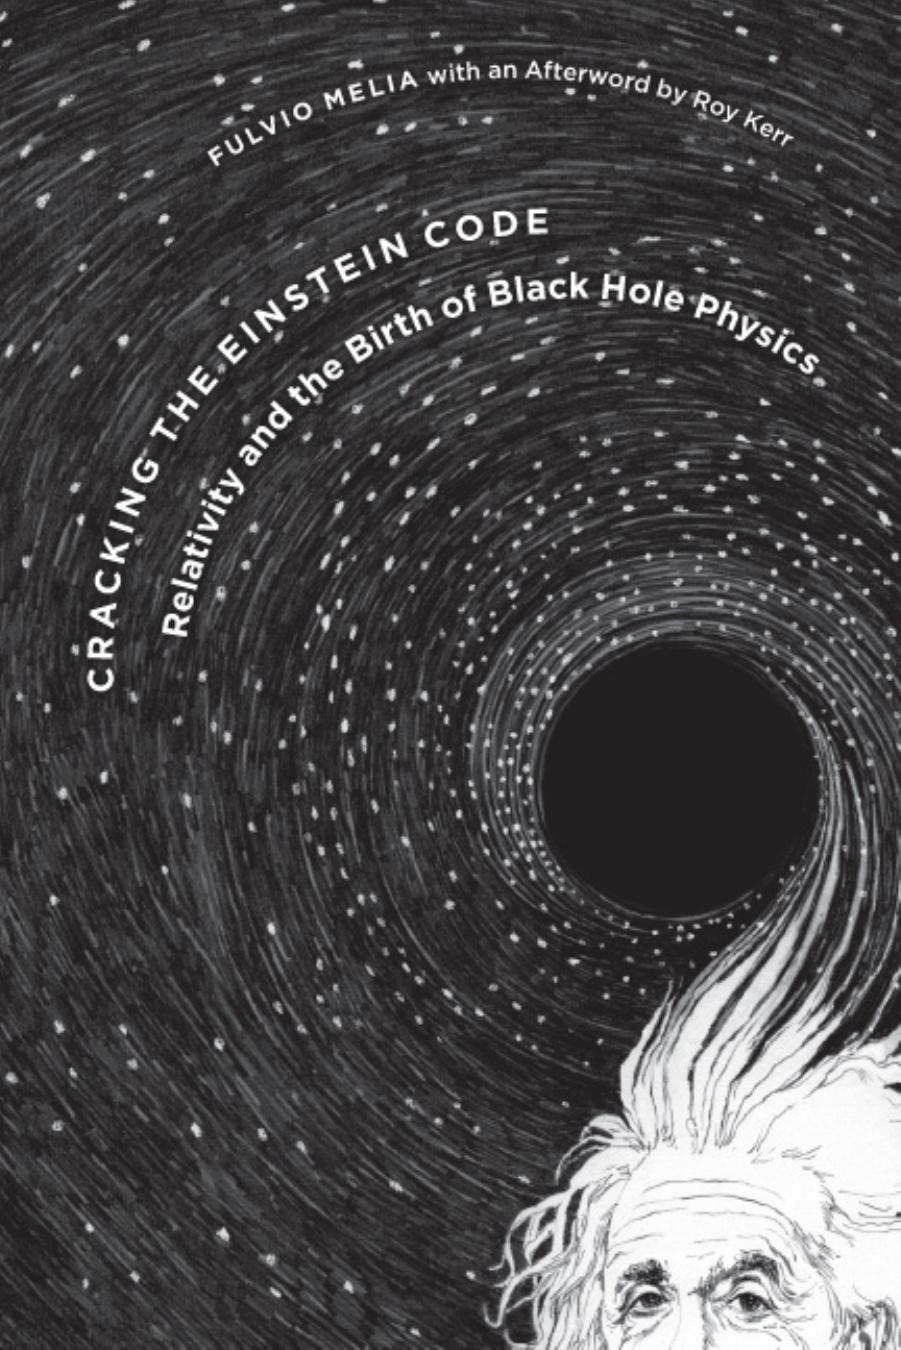 Cracking the Einstein Code: Relativity and the Birth of Black Hole Physics